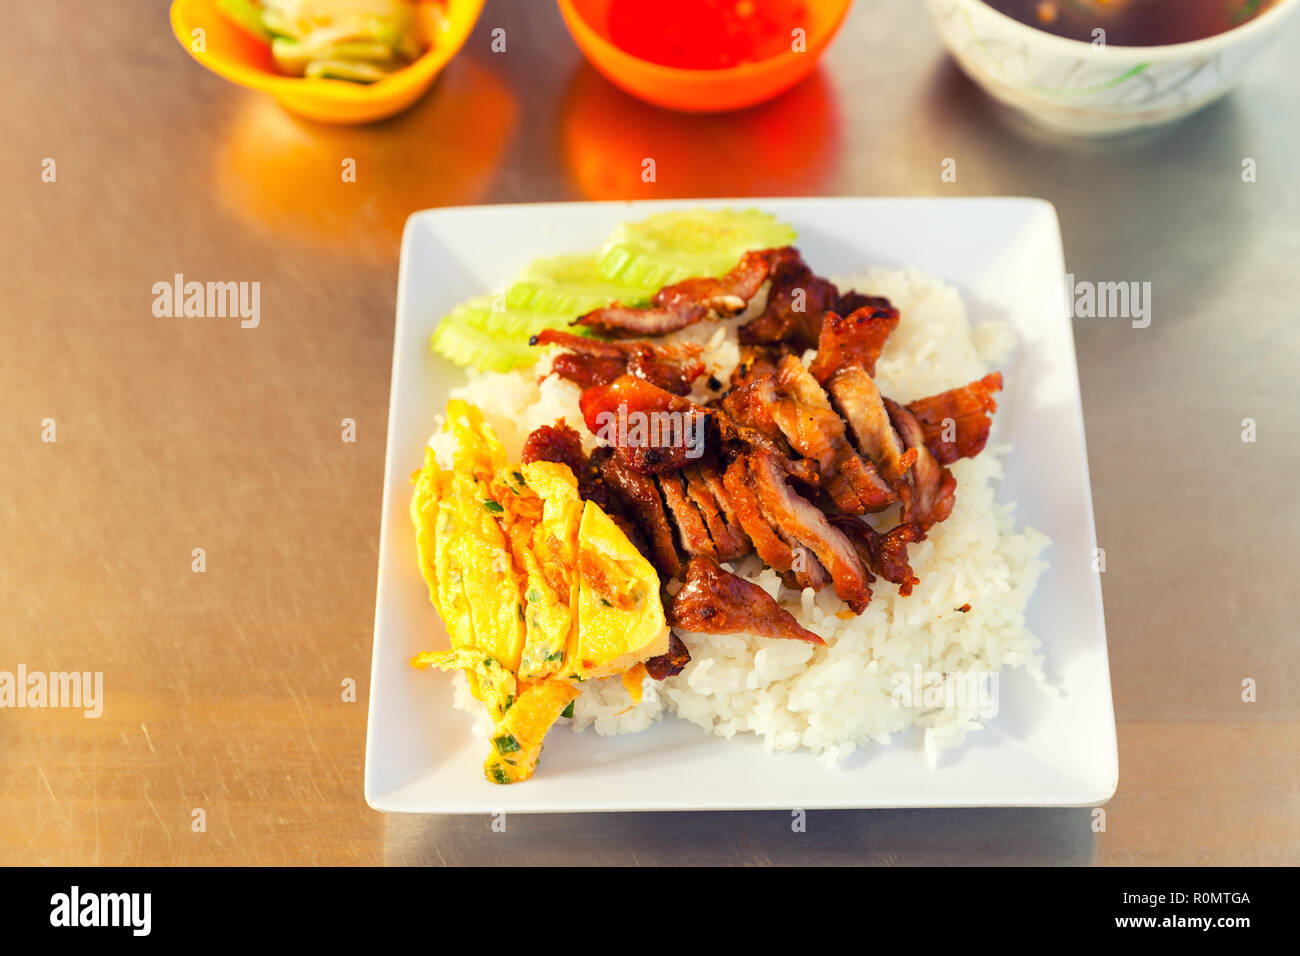 Traditional Asian food Thailand, Cambodia, Bali, Vietnam, Laos food: Fresh scrambled eggs with rice with barbecued meat Stock Photo